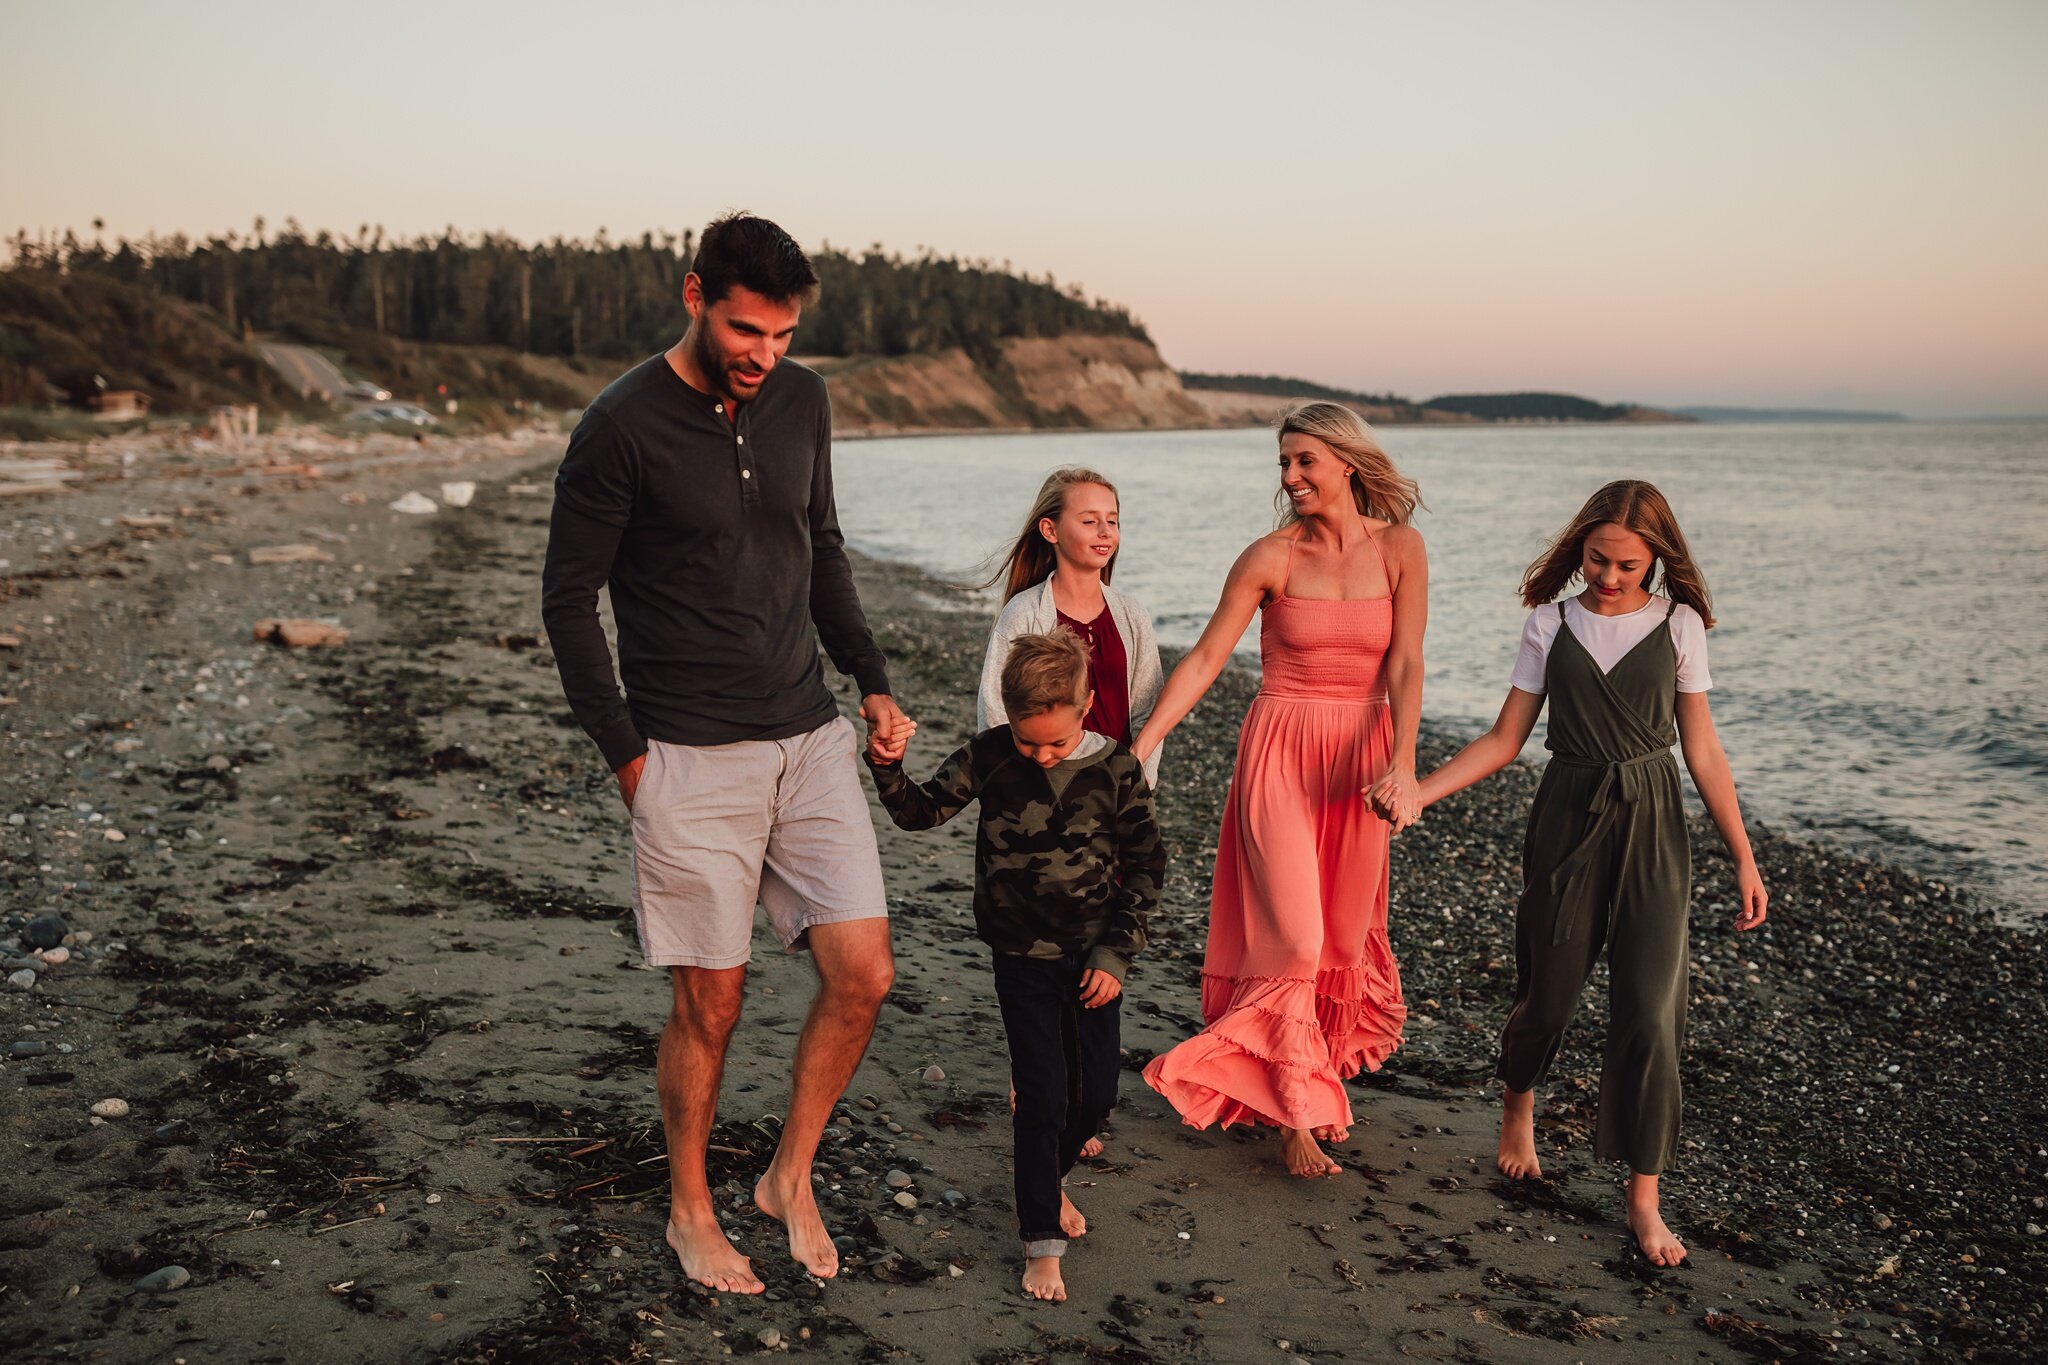  Kara Chappell Photography photographs family of five at Ebey's Landing on Whidbey Island, Washington 